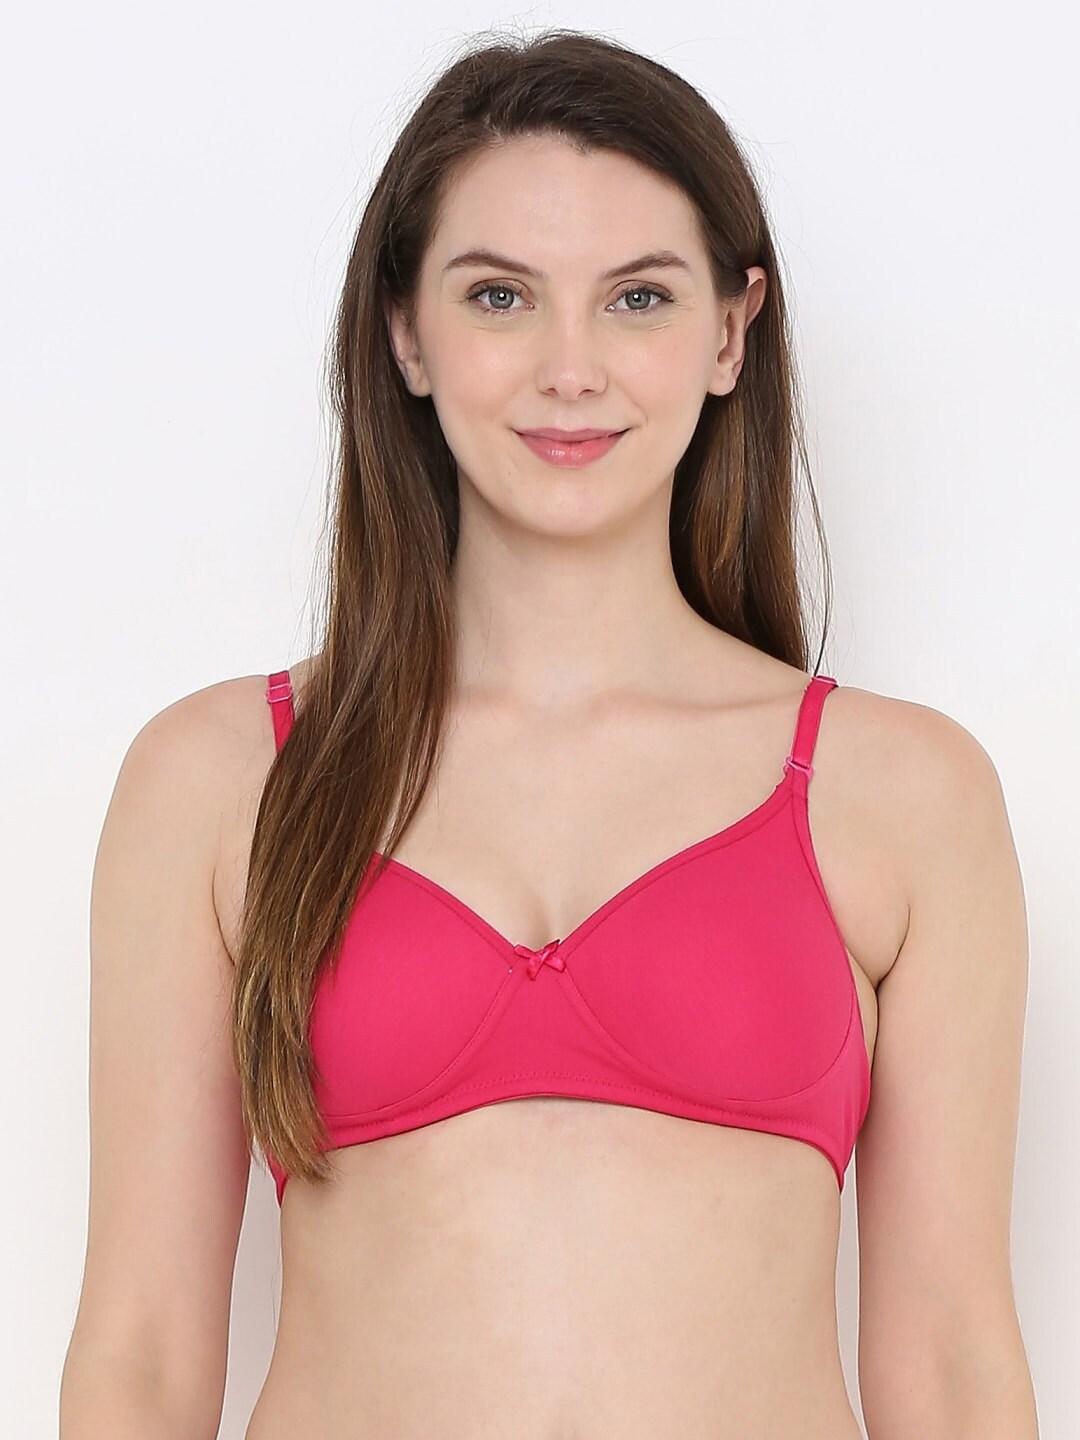 Berrys Intimatess Non-Wired & Lightly Padded with Medium Coverage T-shirt Bra